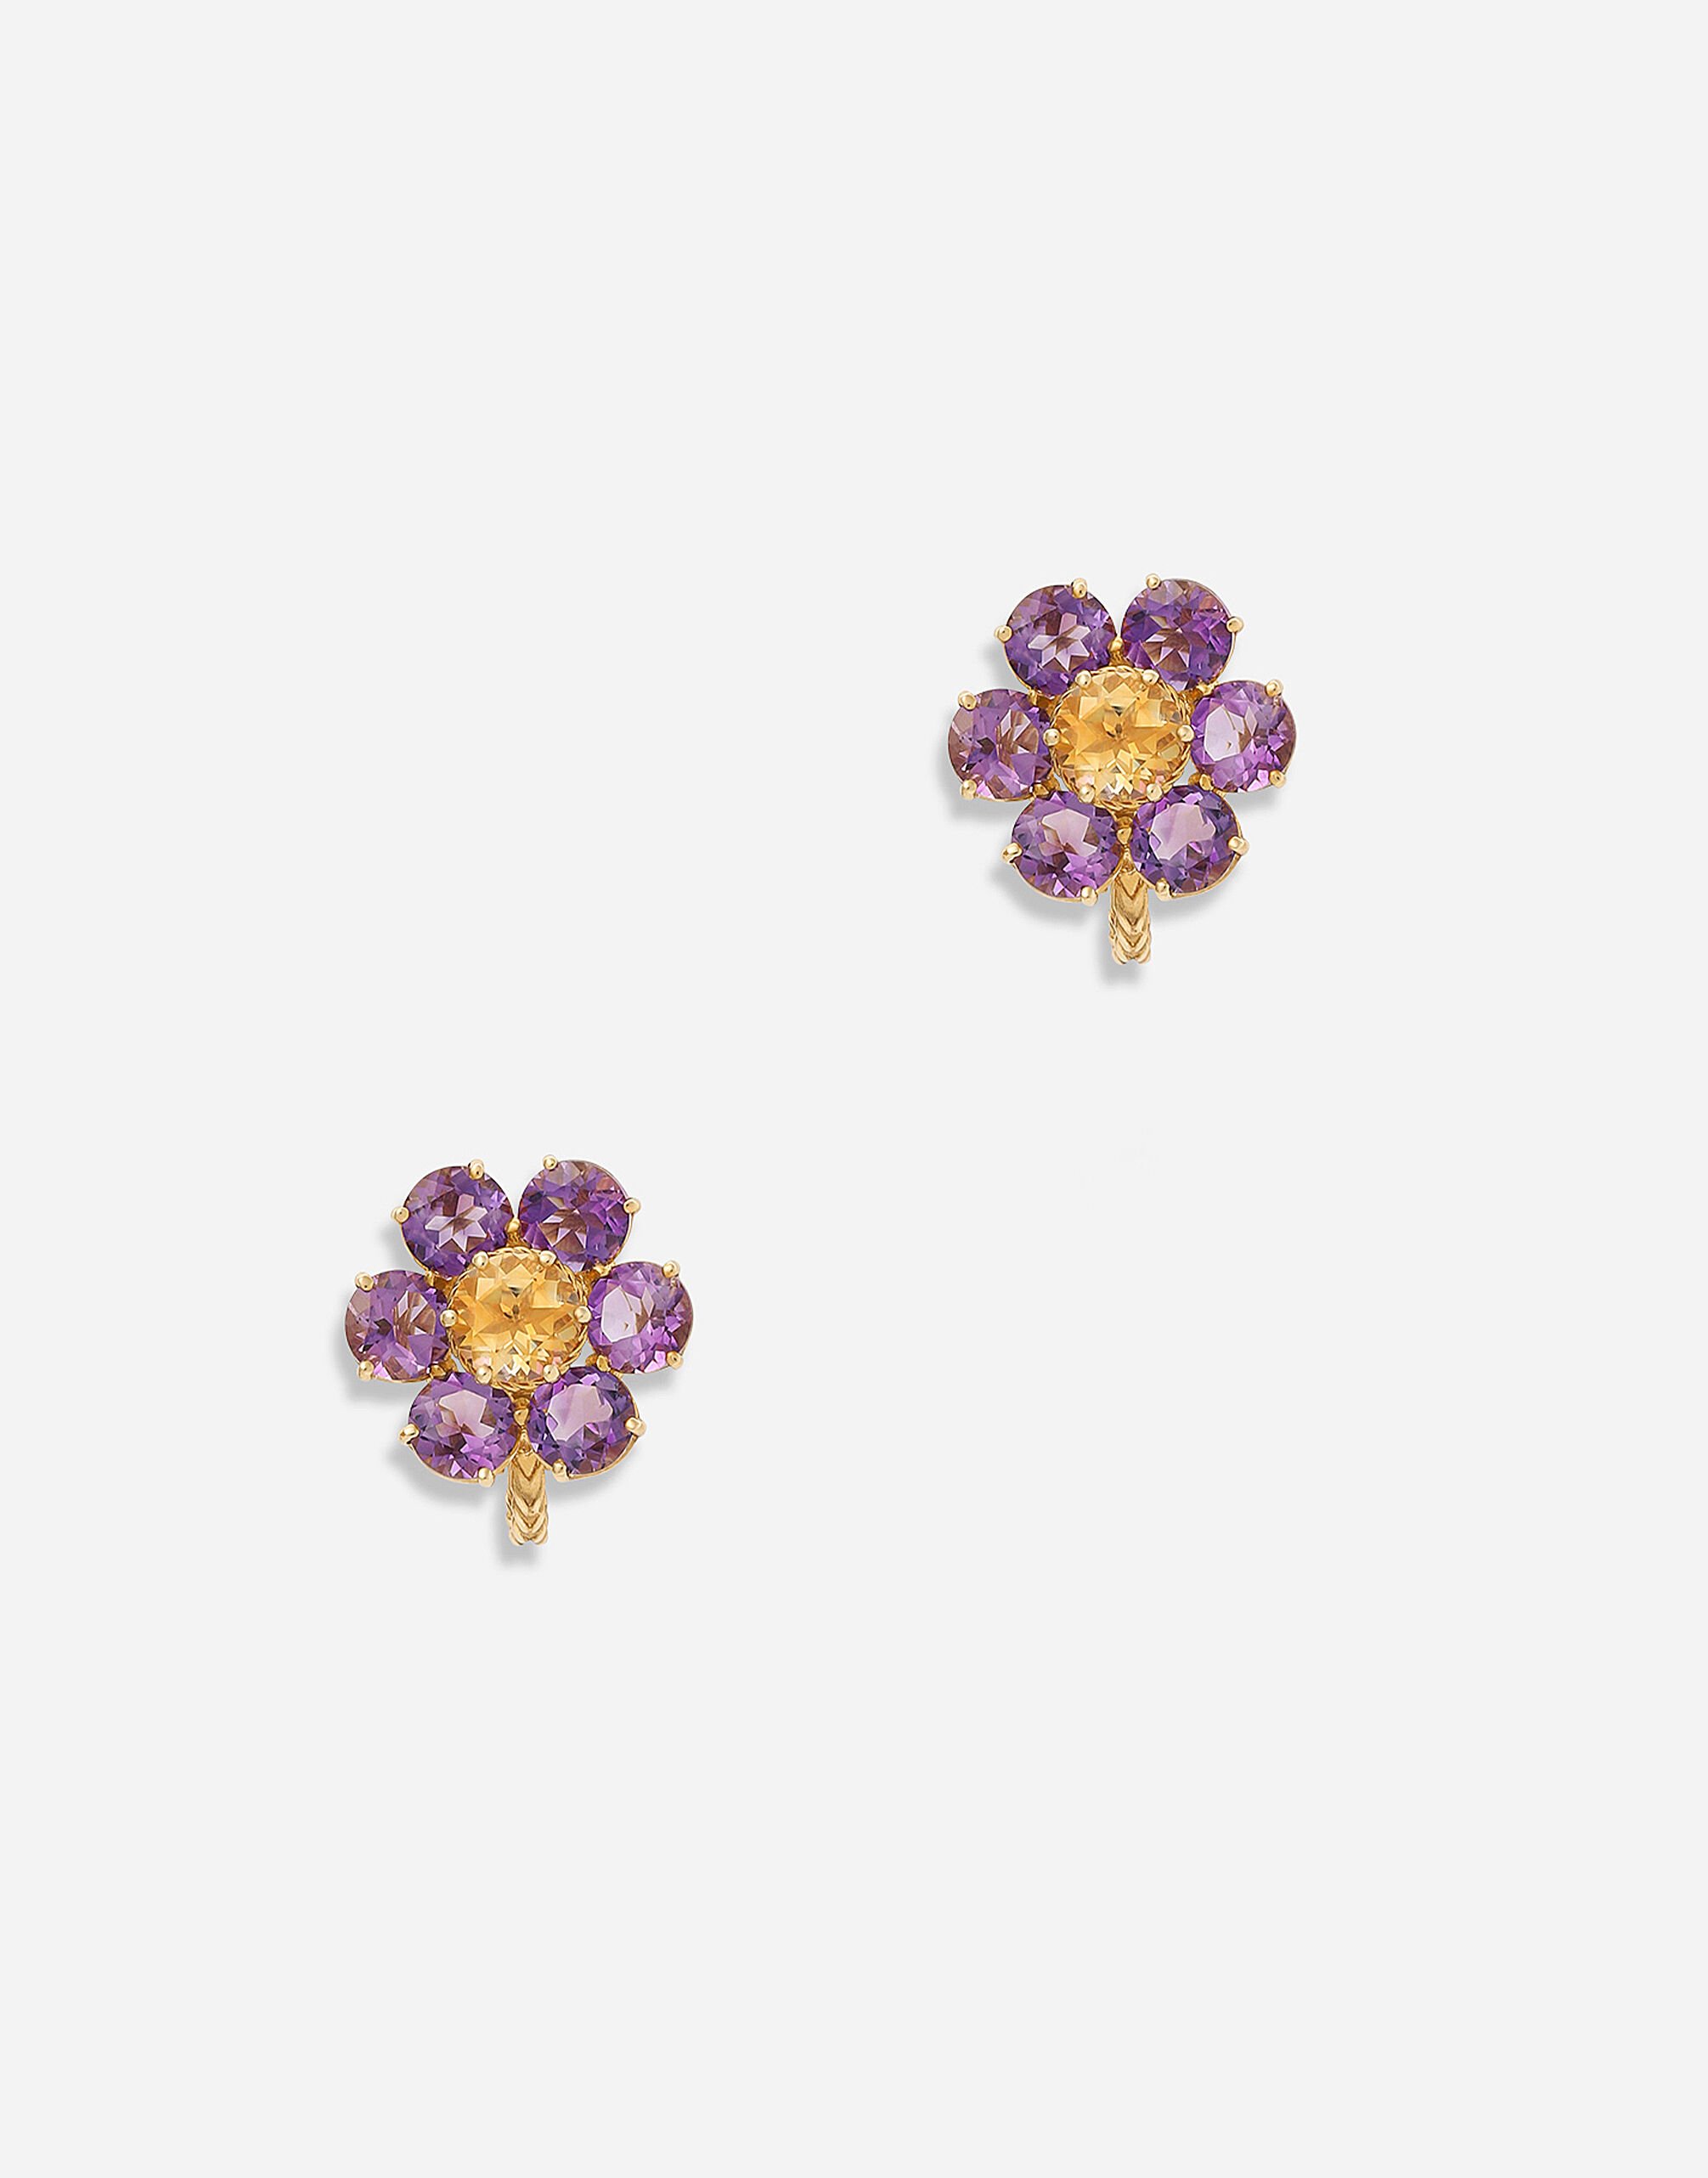 Dolce & Gabbana Spring earrings in yellow 18kt gold with amethyst flower motif White WEQA1GWSPBL